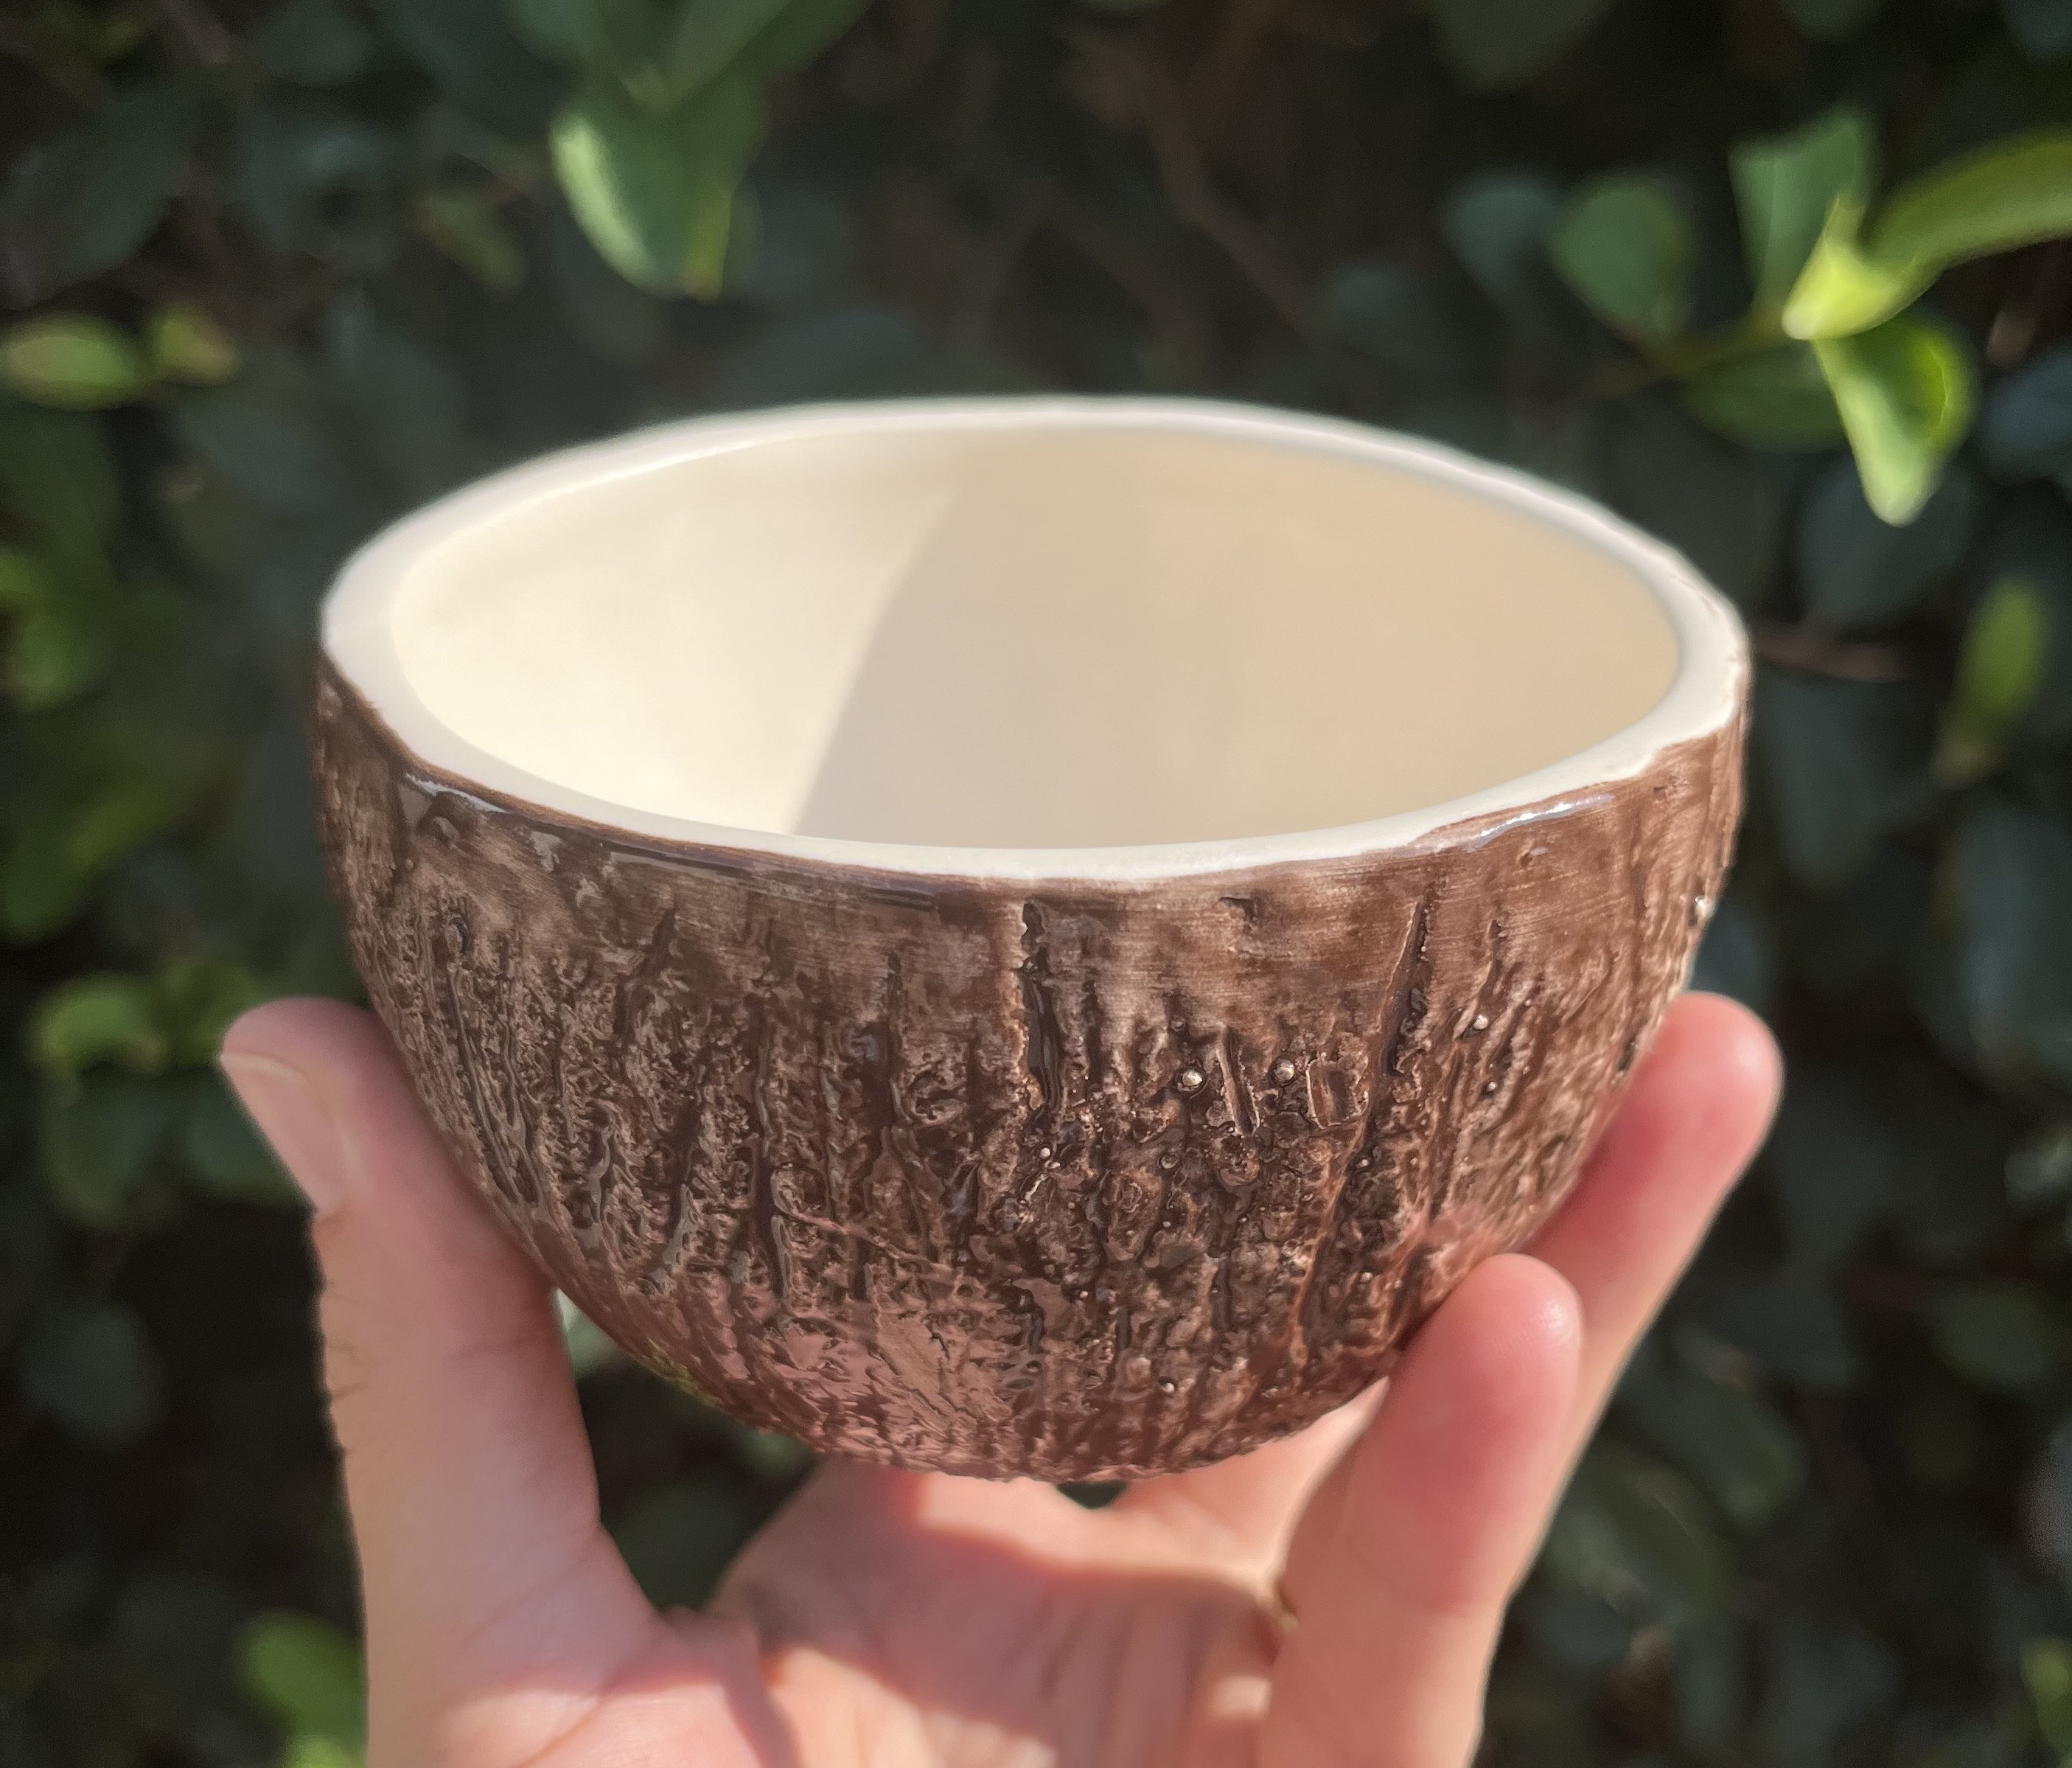 HOW TO MAKE COCONUT BOWL AT HOME WITH NO SPECIAL TOOLS